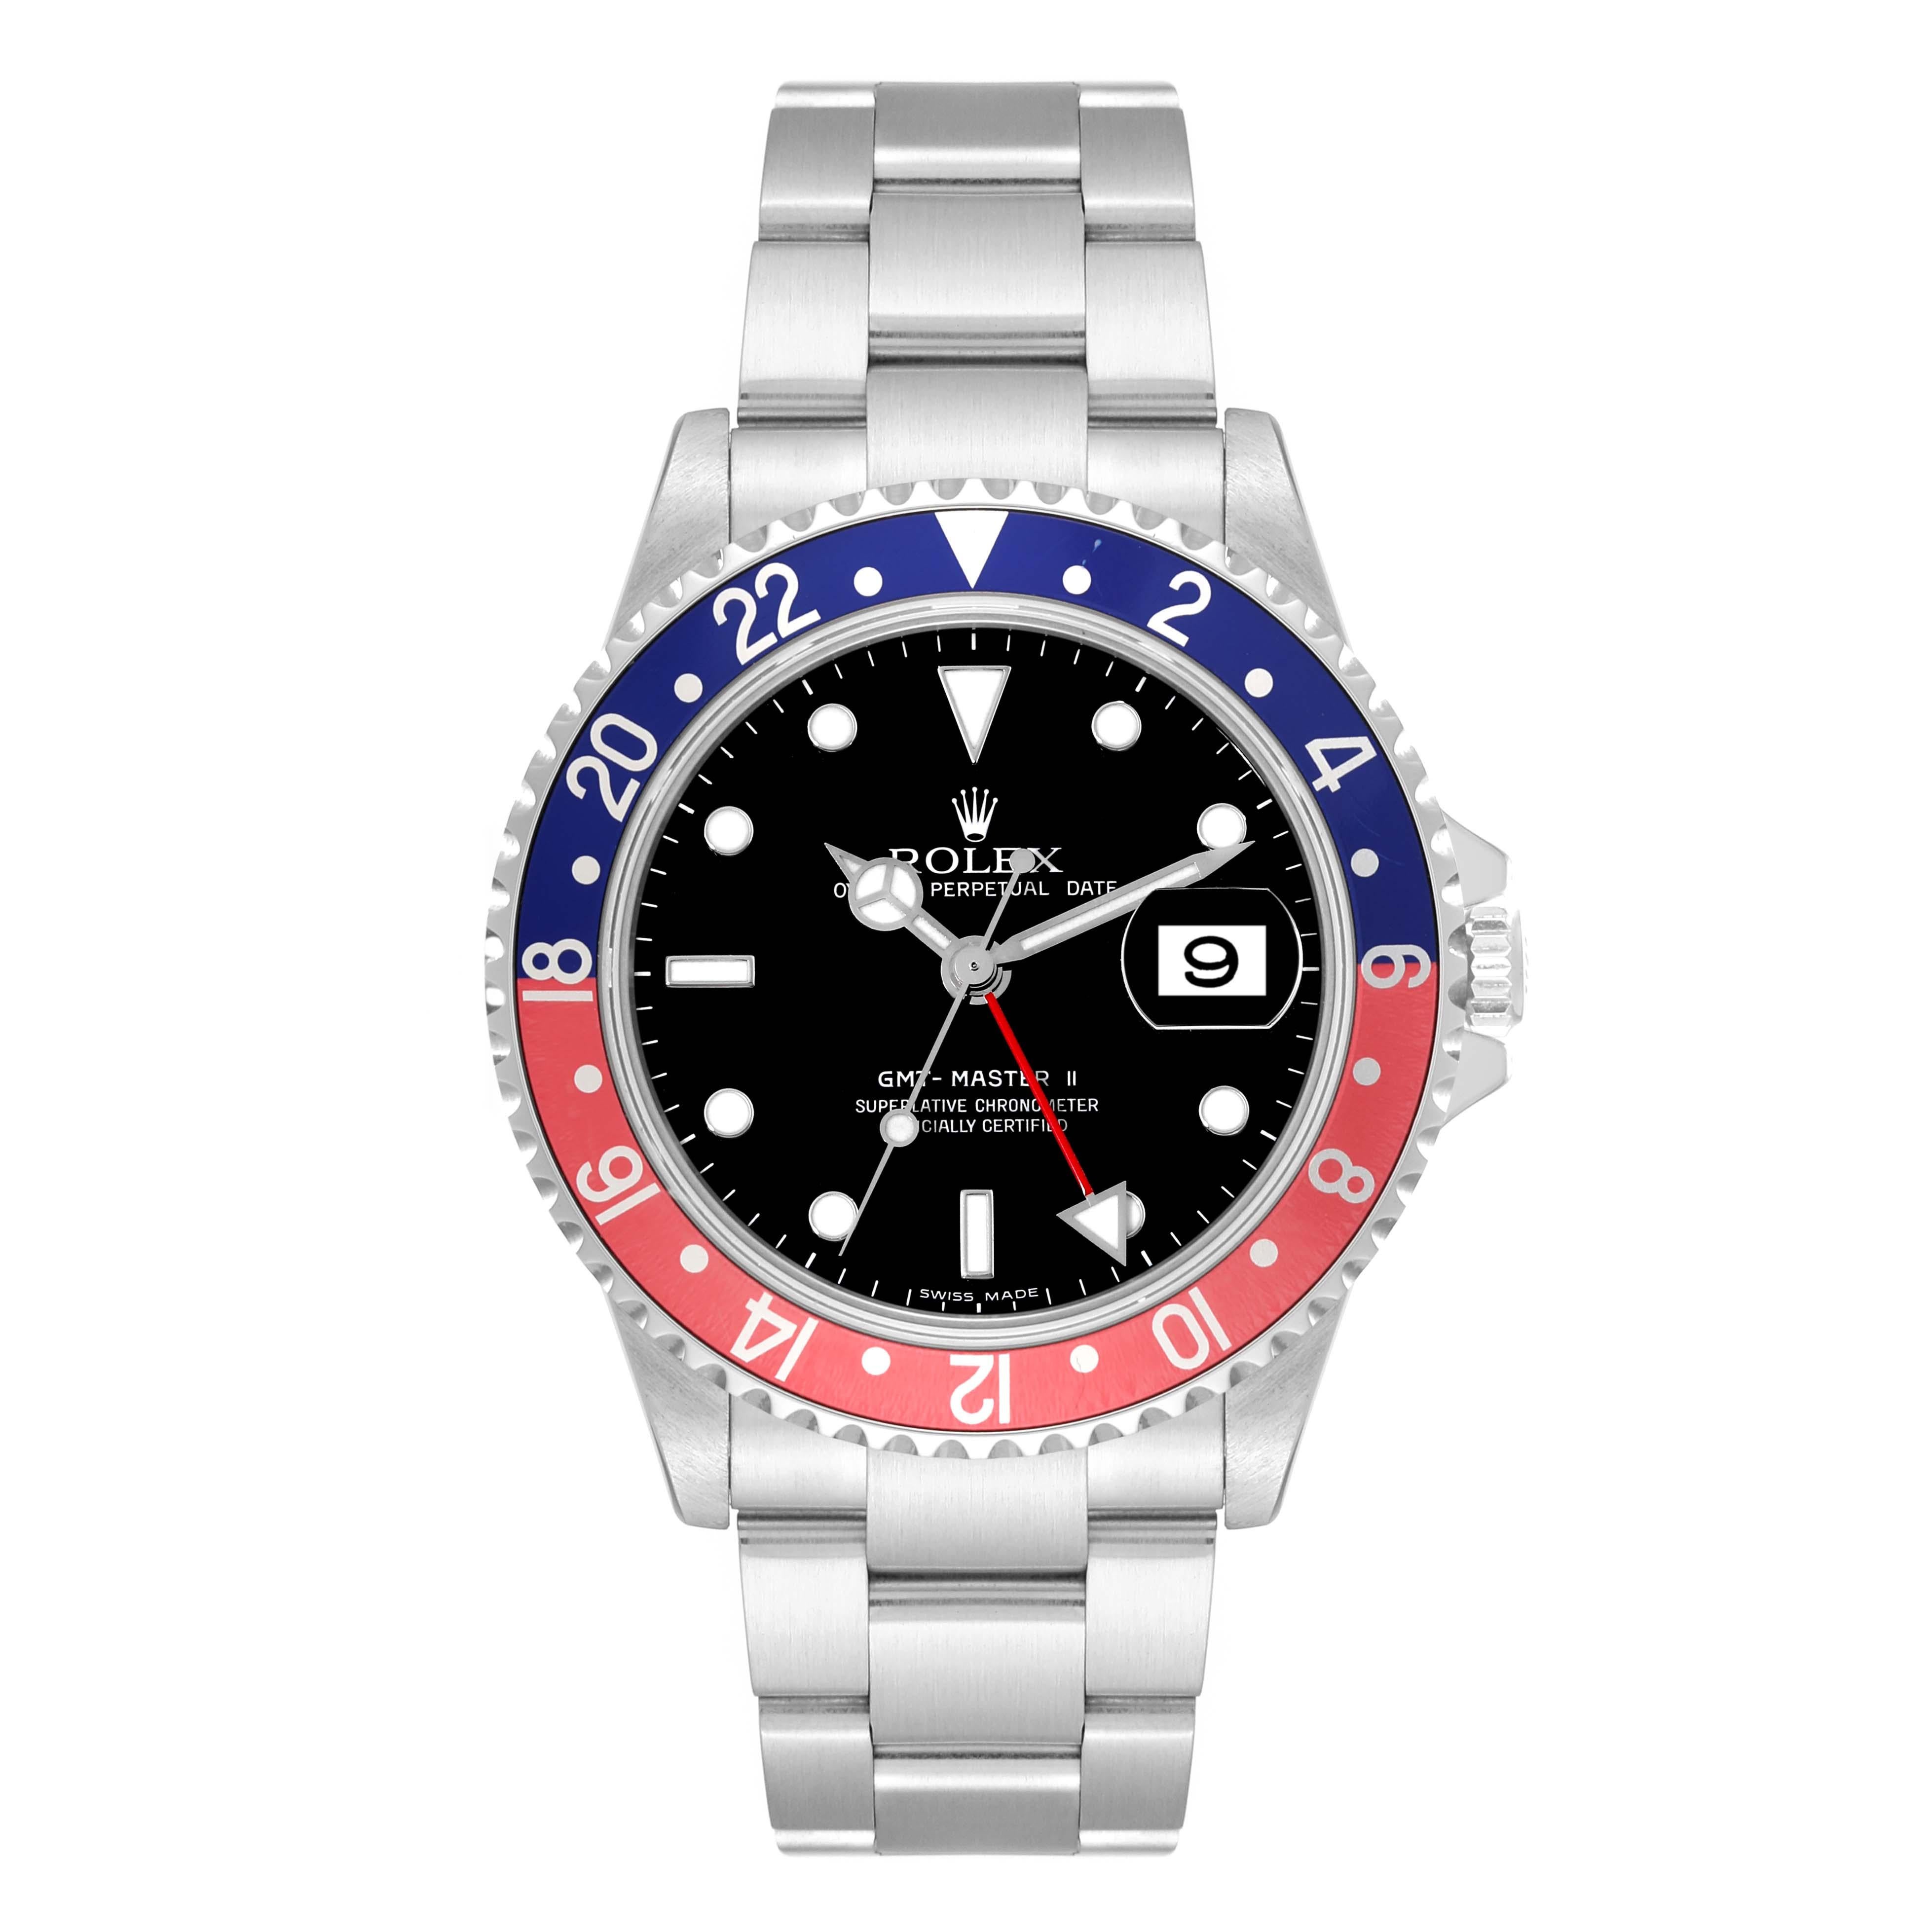 Rolex GMT Master II Blue Red Pepsi Error Dial Steel Mens Watch 16710 Box Papers 1